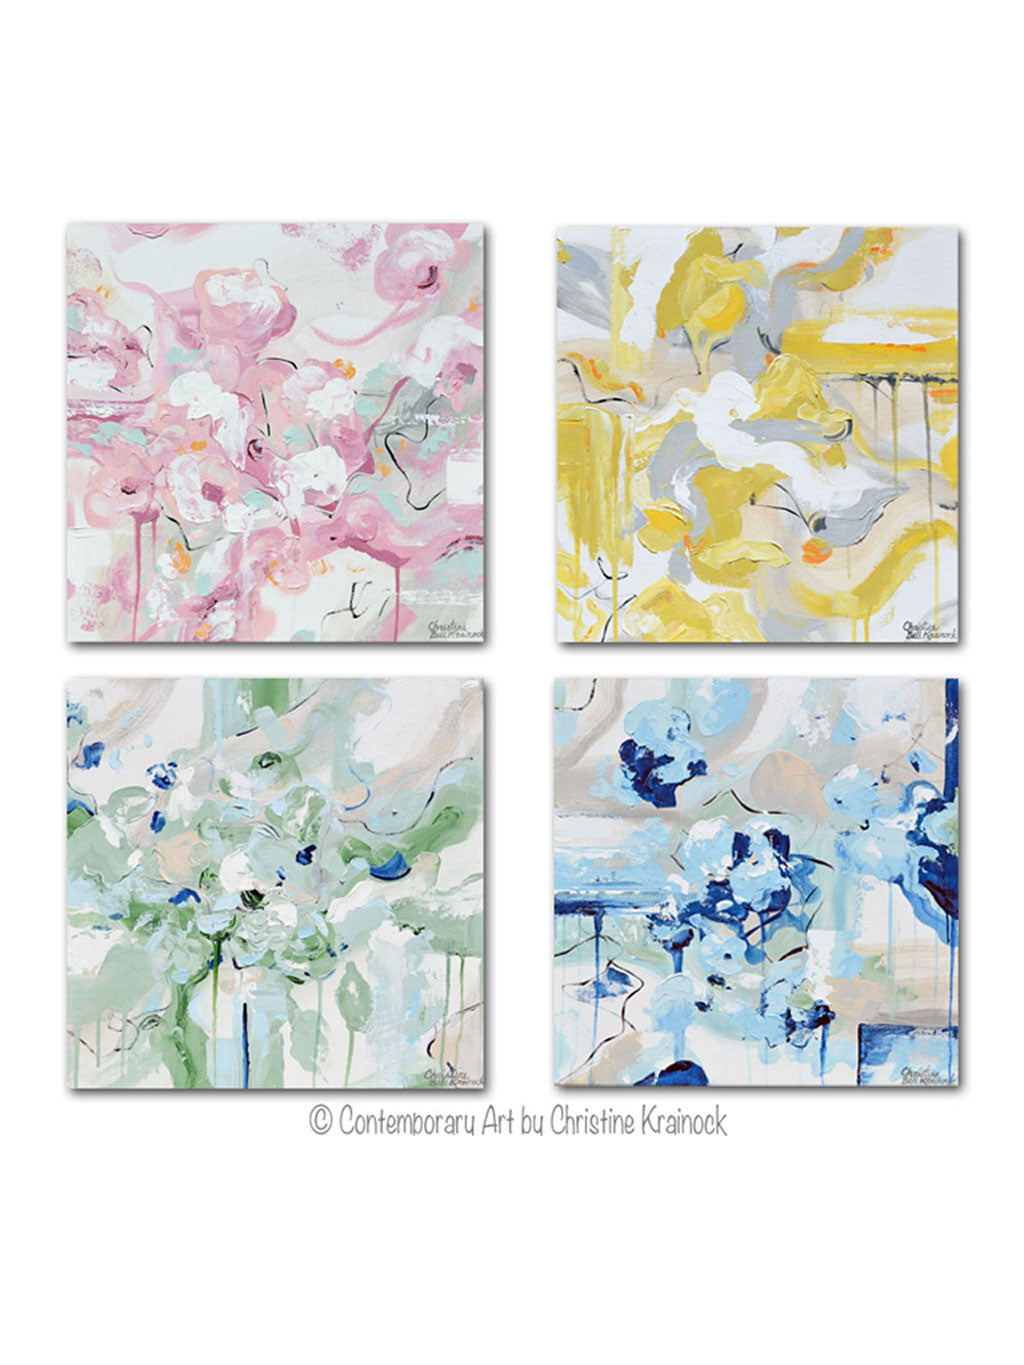 ORIGINAL Art Abstract Paintings -Set of 4- 20" Colorful Wall Art Home Decor Canvas Totaling 40x40"